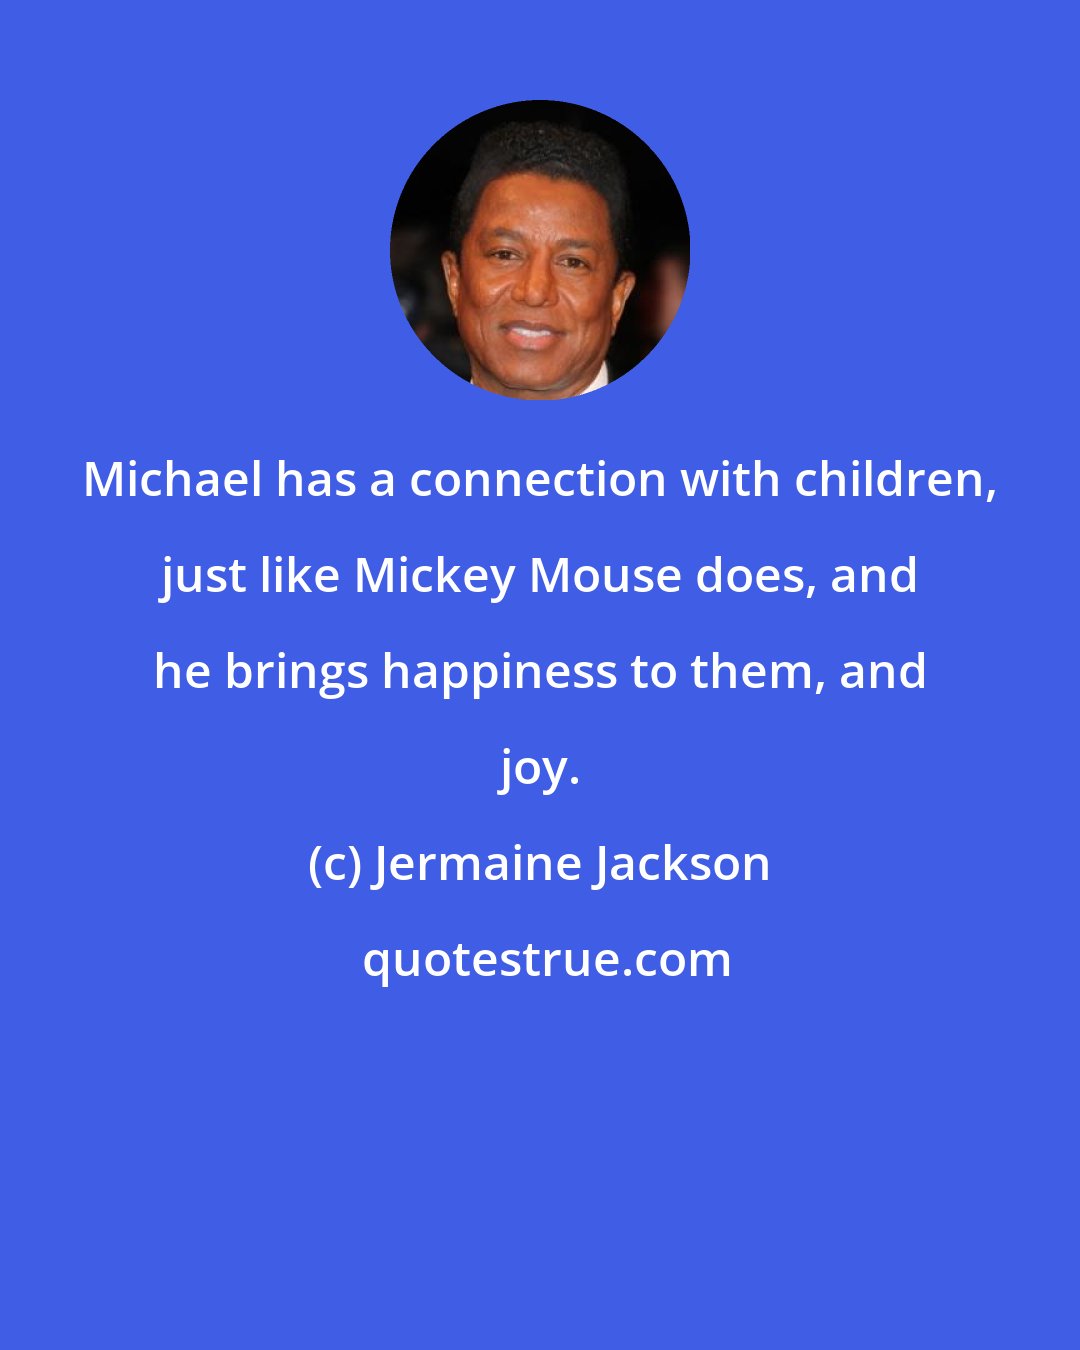 Jermaine Jackson: Michael has a connection with children, just like Mickey Mouse does, and he brings happiness to them, and joy.